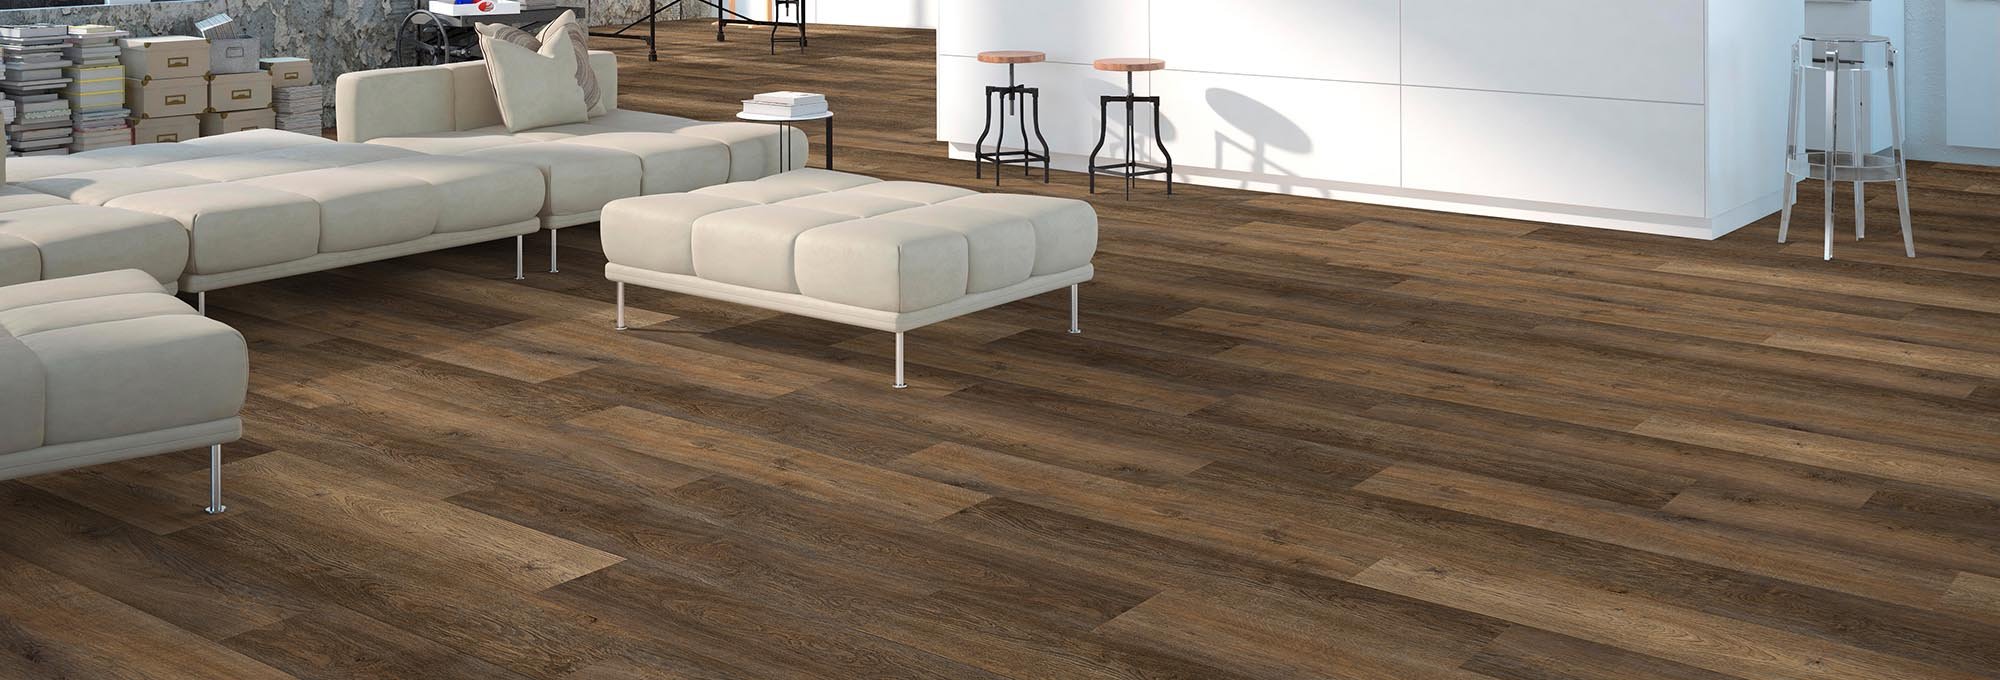 Shop Flooring Products from Johnny's Floors in Marble Falls, TX